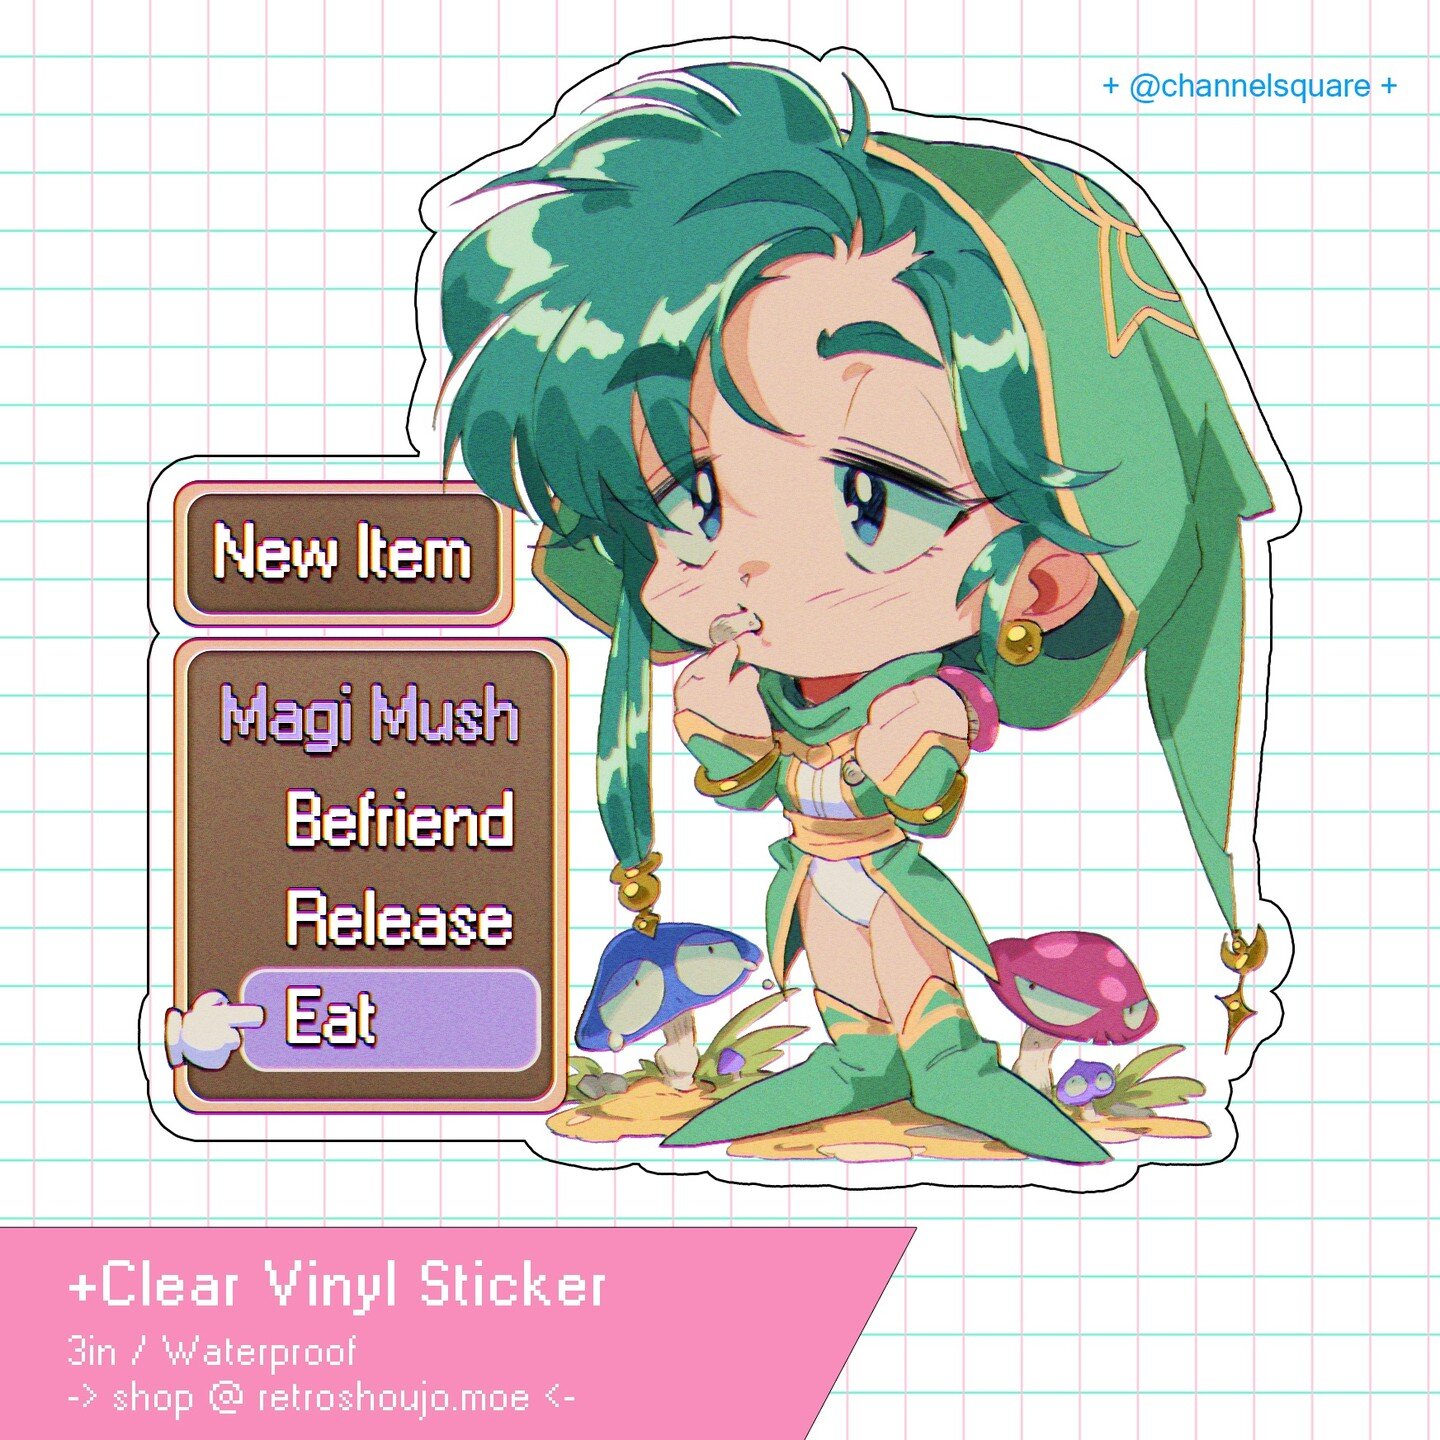 Available to pre-order! Website in my bio or sign-up for my patreon to receive both a sticker and digital rewards.

#sticker #stickershop #90sanime #90sanimeaesthetic #90sanimestyle #classicanime #slayers #druid #dnd #dungeonsanddragons #classicrpg #